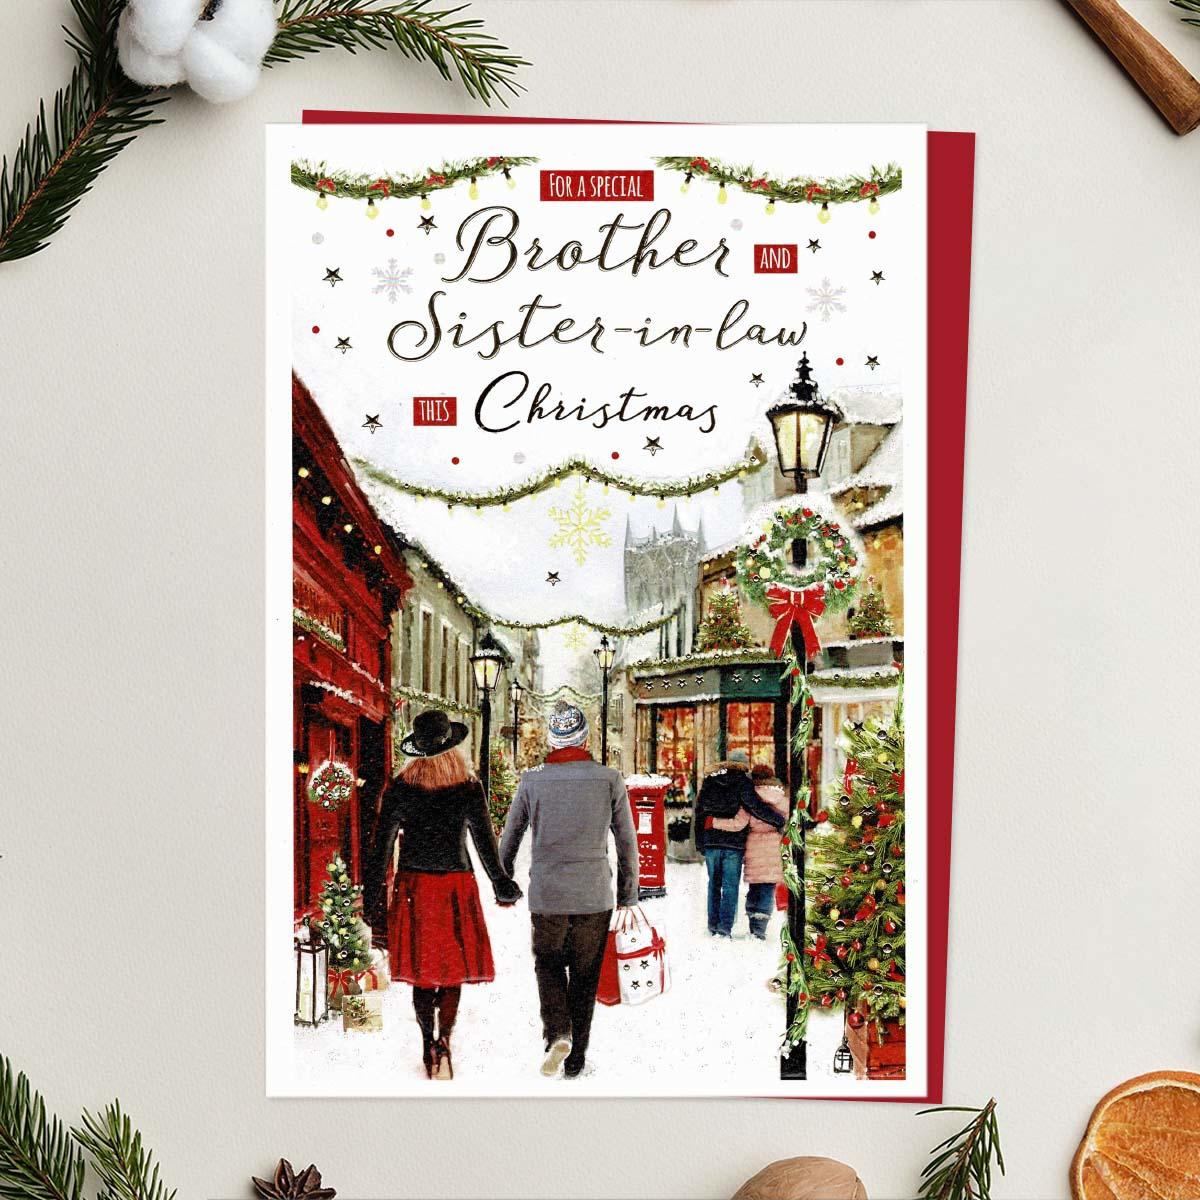 To A Special brother and Sister In Law Christmas Card Featuring Puppies By The front Door! Finished With Silver Foiled Lettering, Red Glitter Detail, Red Envelope And Printed Insert